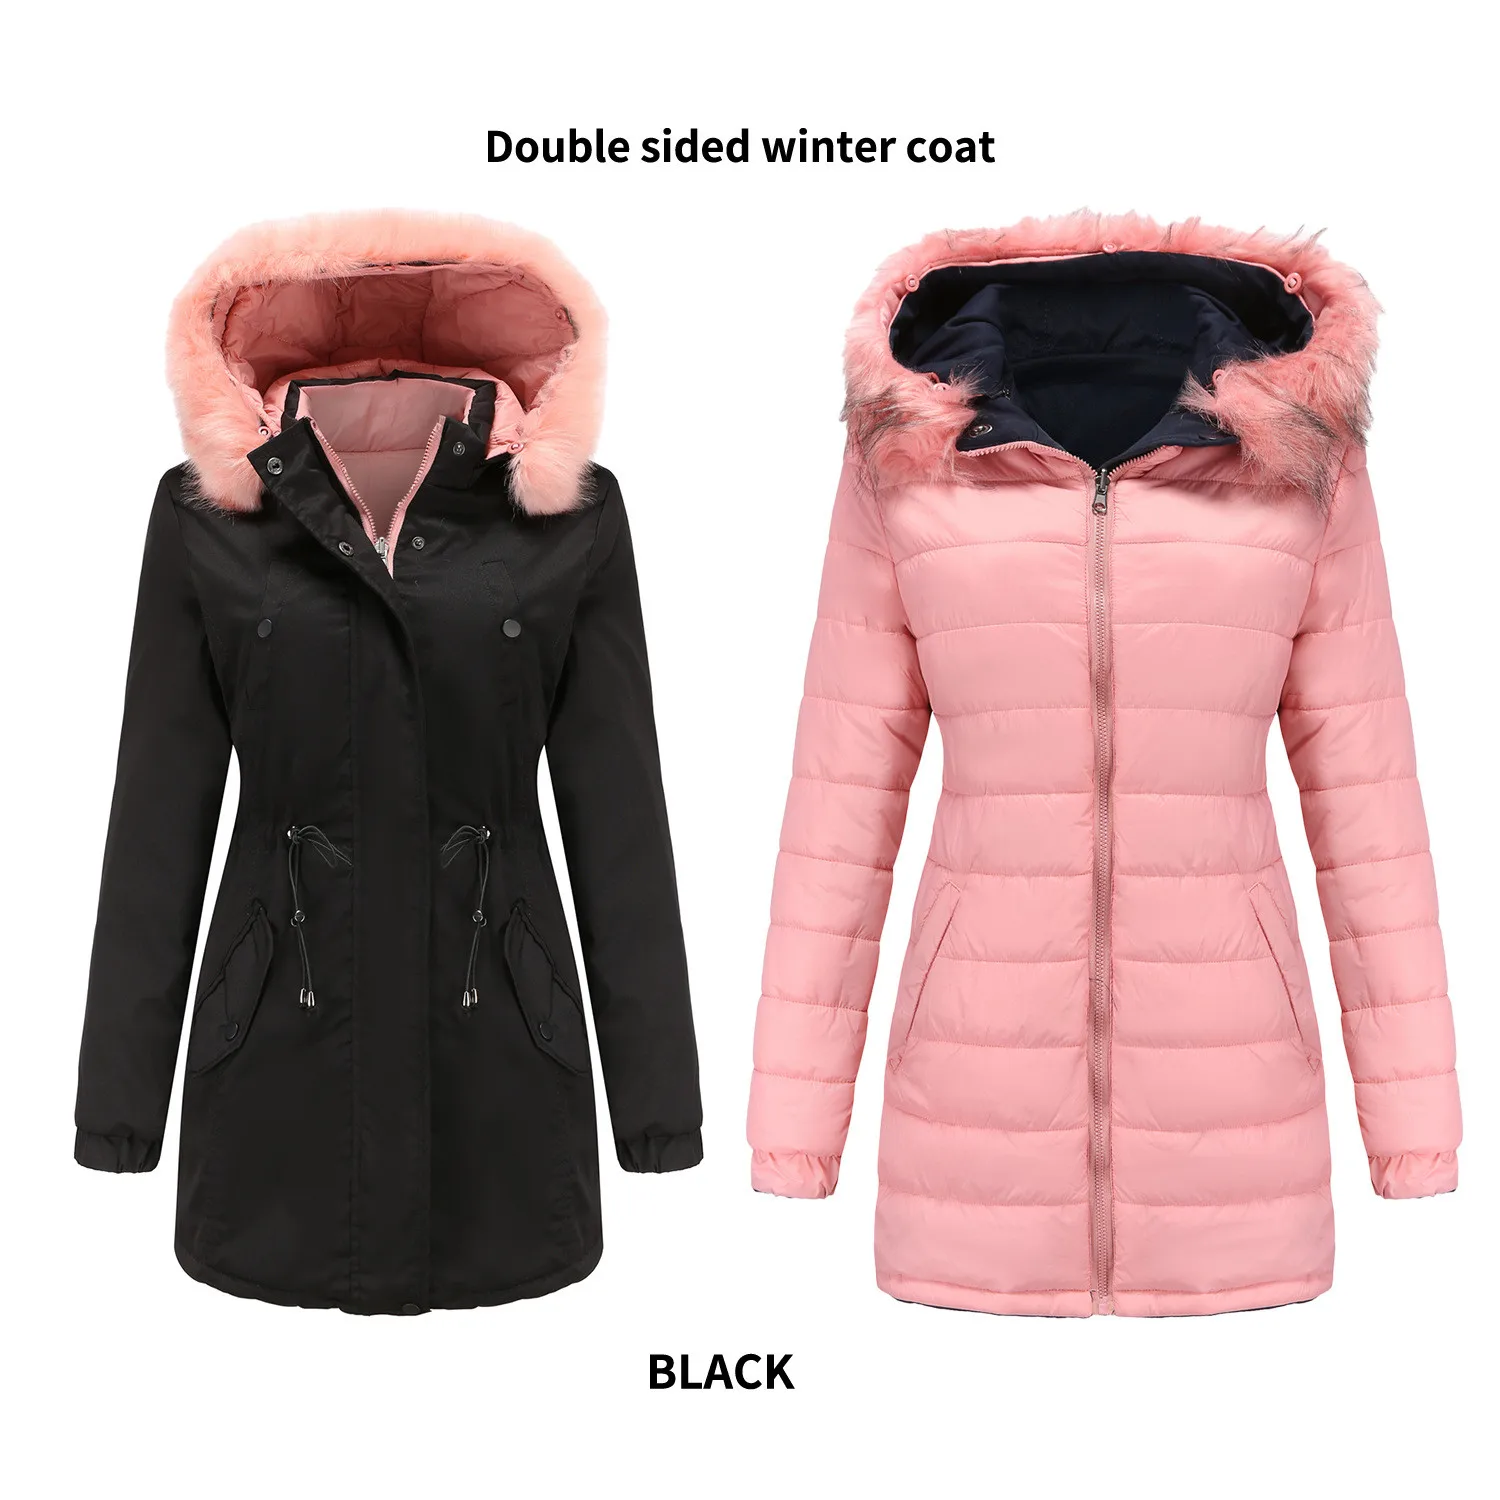 Double-sided Wear Winter Coat Women's Parka Coat Detachable Plush Pluffy Collar Hat Hooded Warm Quilted Coat Jacket Outerwear